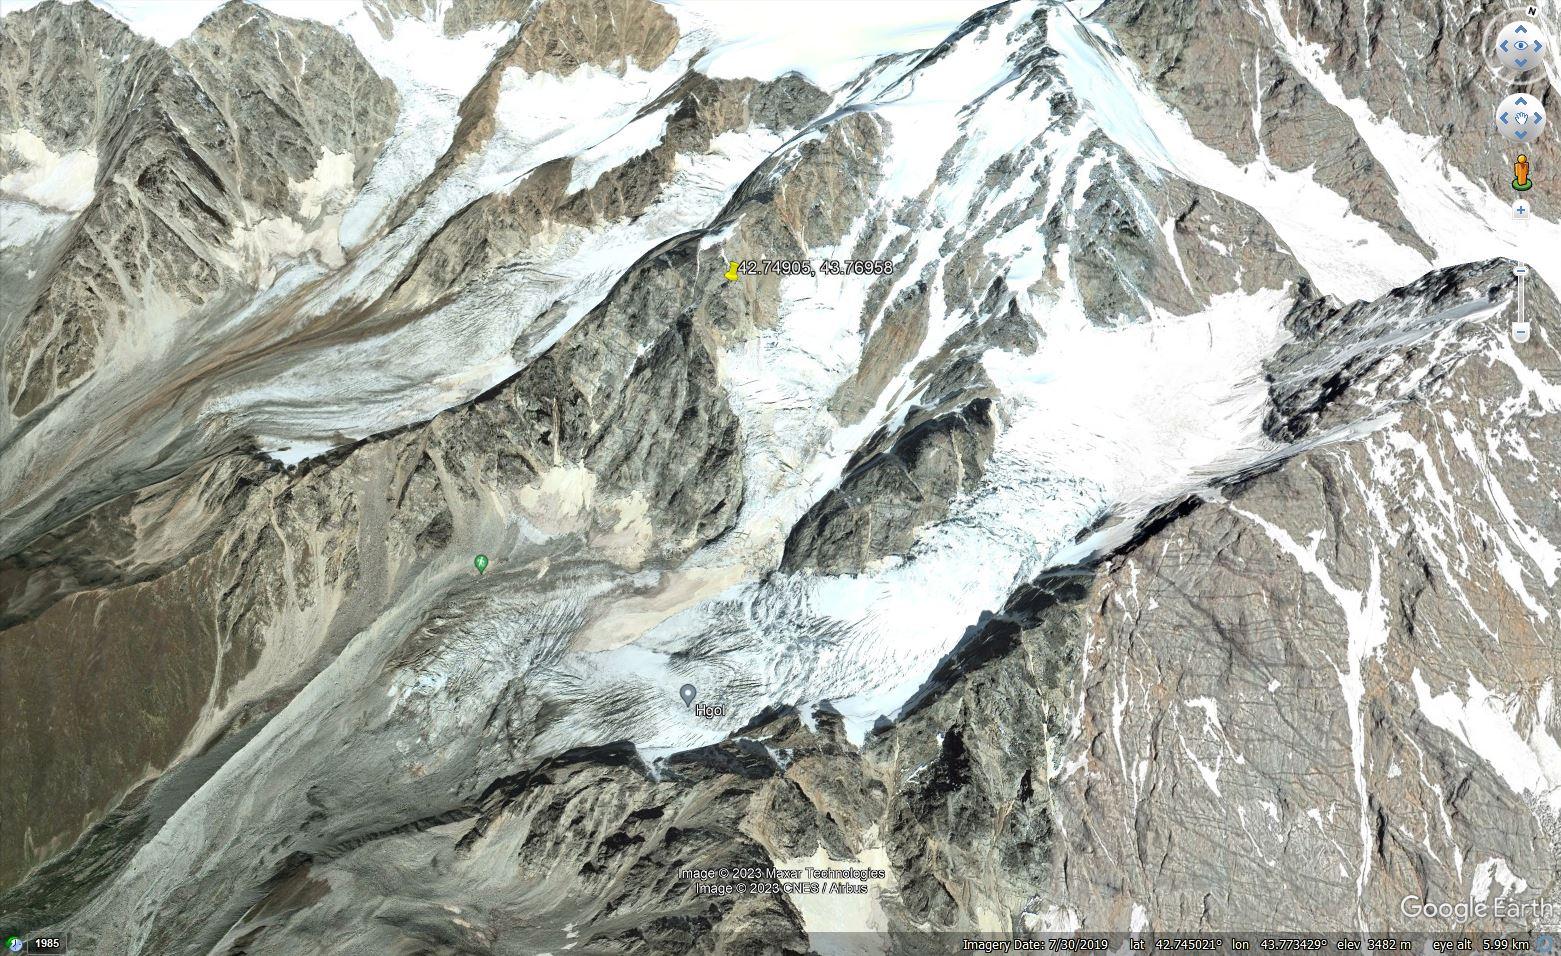 Google Earth image from 2019 showing the source zone of the 4 August 2023 landslide at Shovi in Georgia.